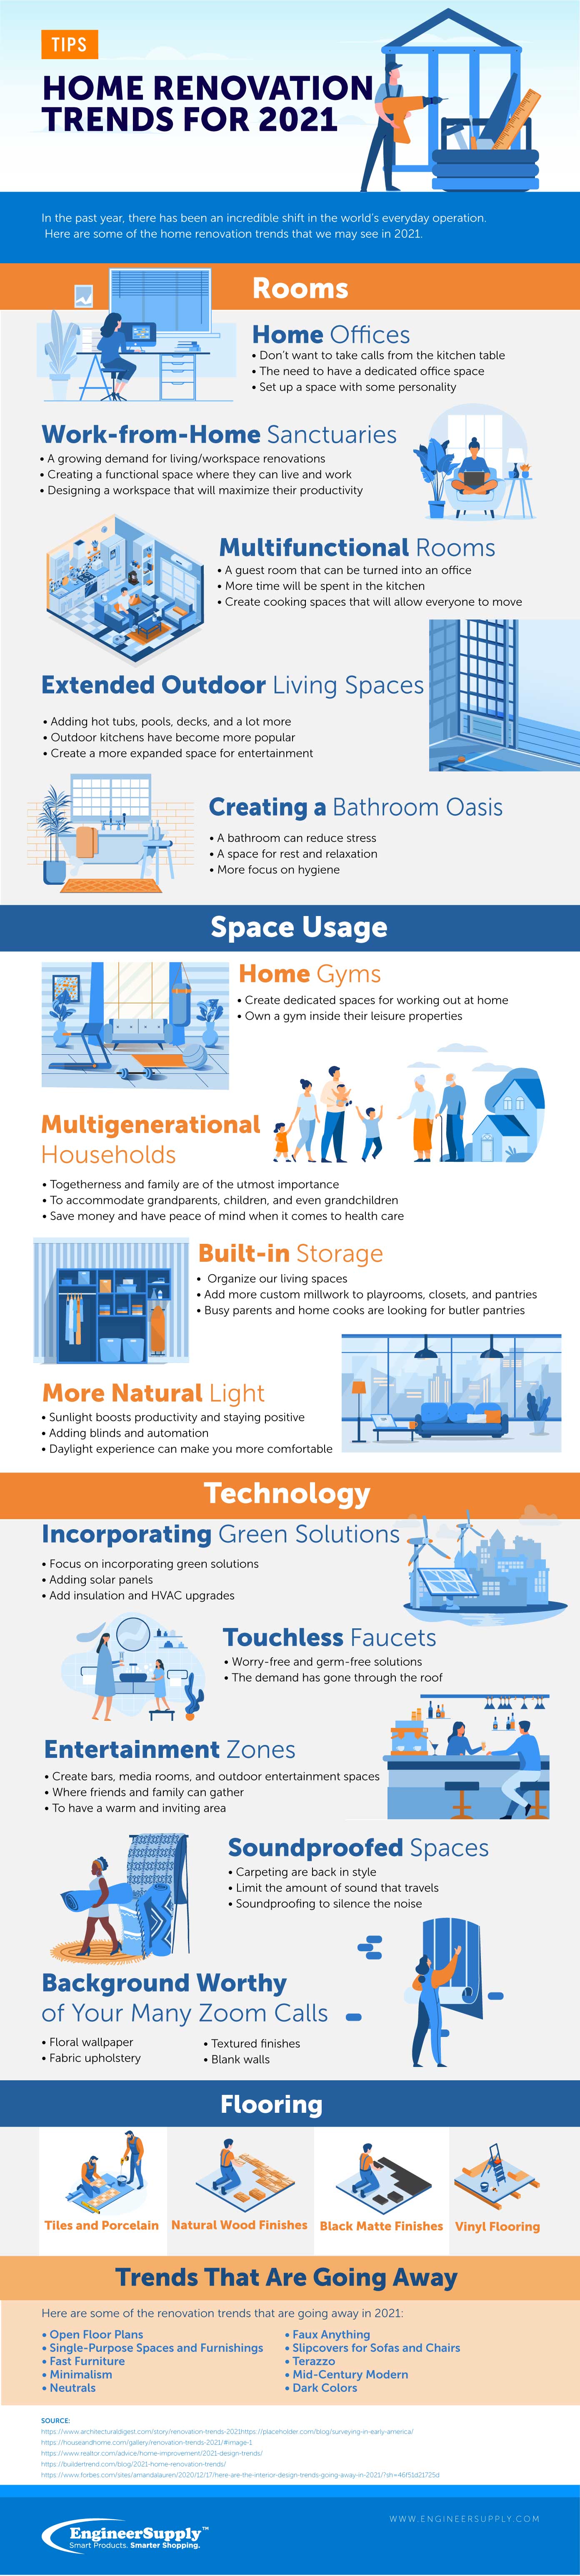 Home Renovation Trends for 2021 infographic